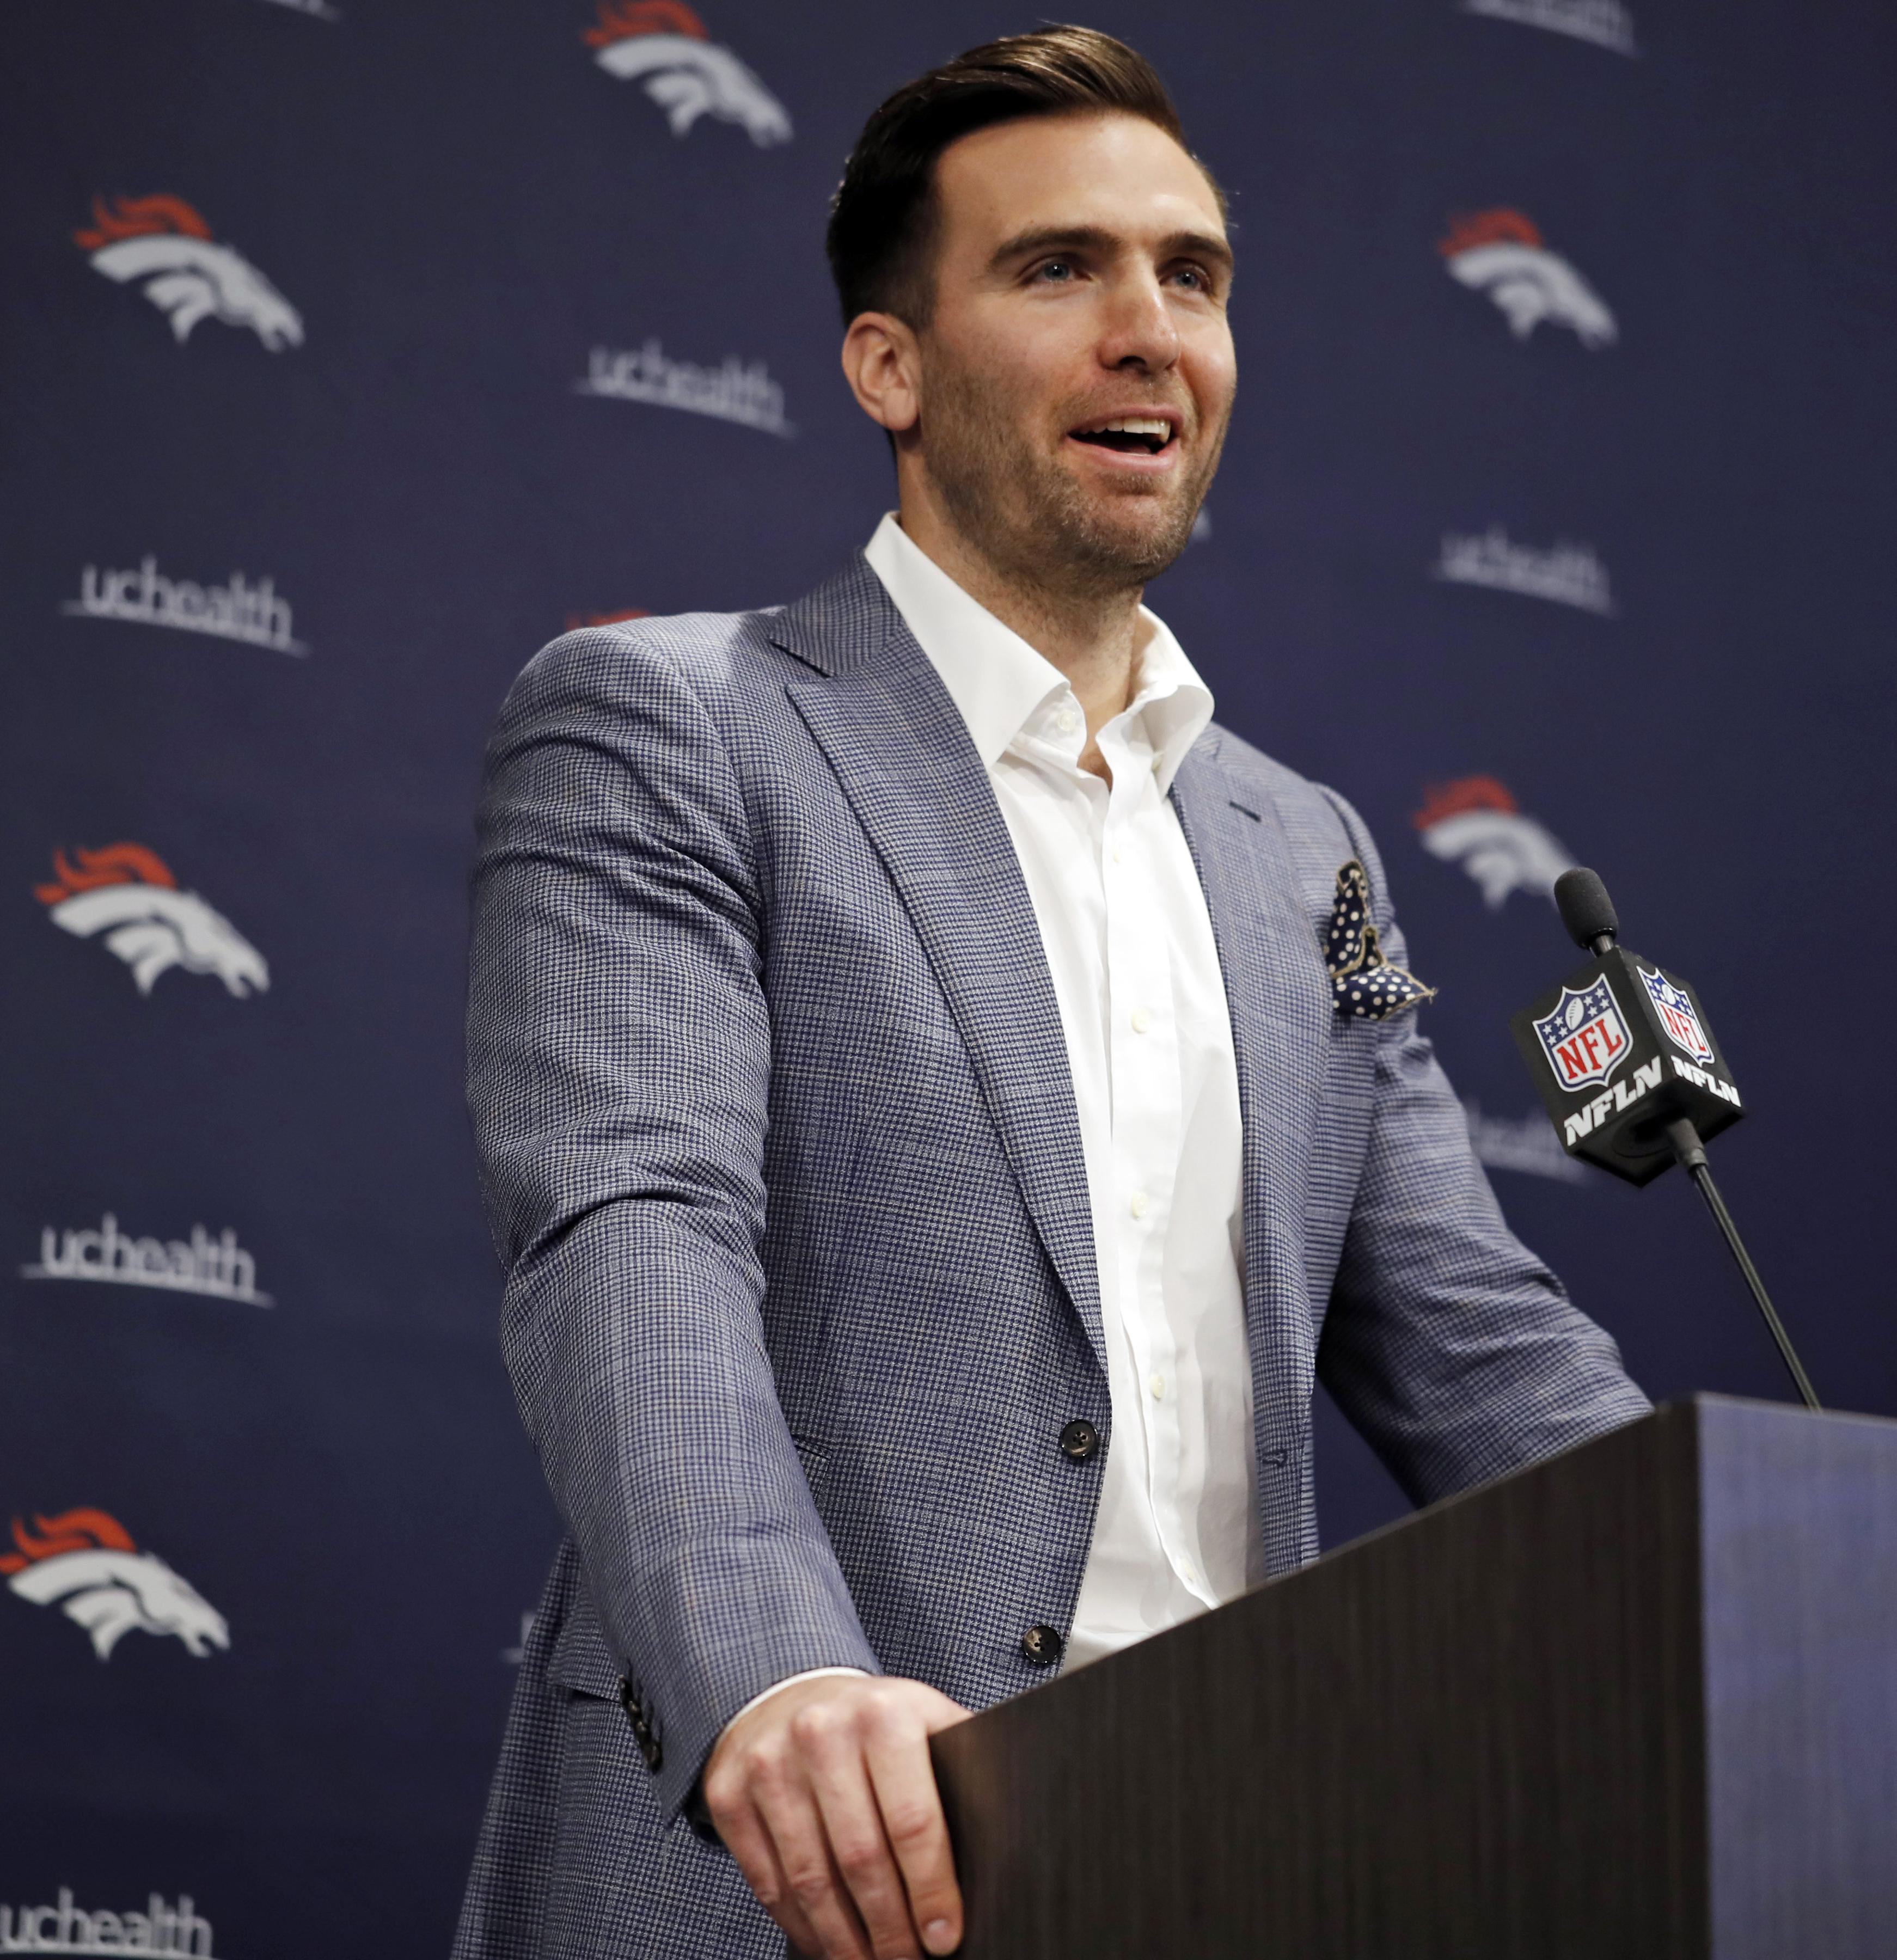 John Elway insists Joe Flacco is still in his prime at age 34 The